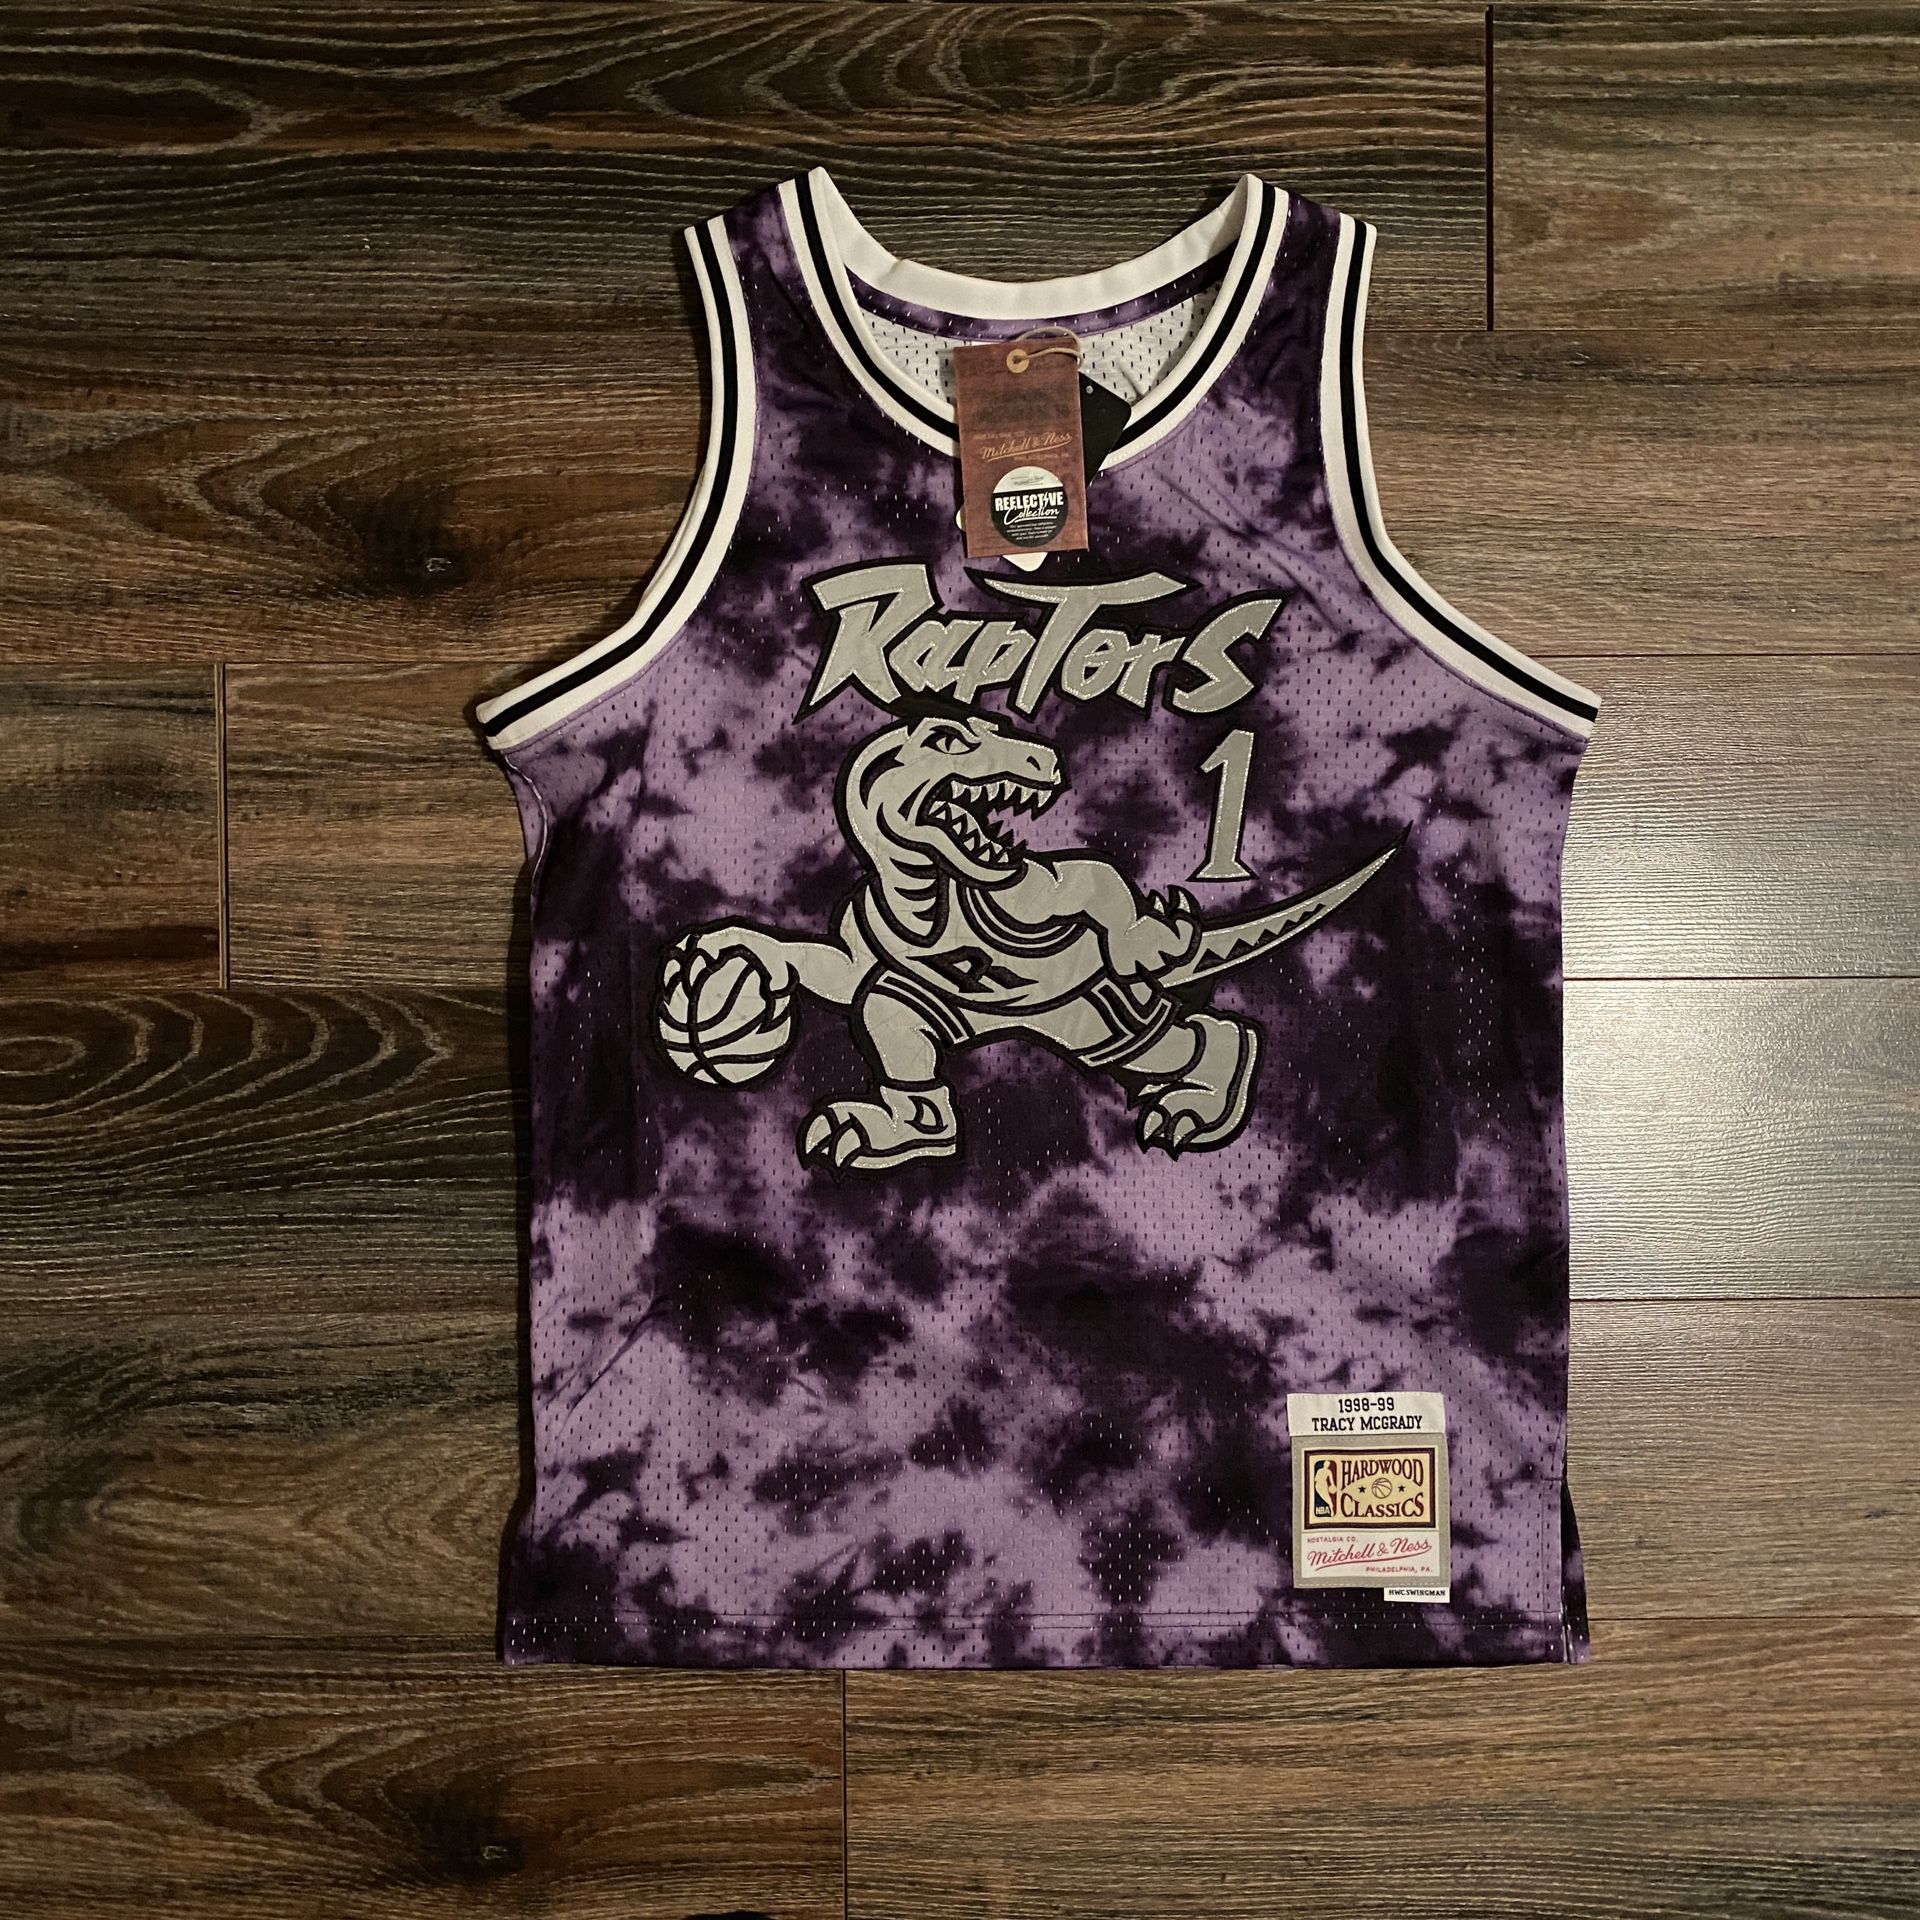 NBA MITCHELL & NESS TOTONTO RAPTORS VINCE CARTER REFLECTIVE COLLECTION JERSEY 